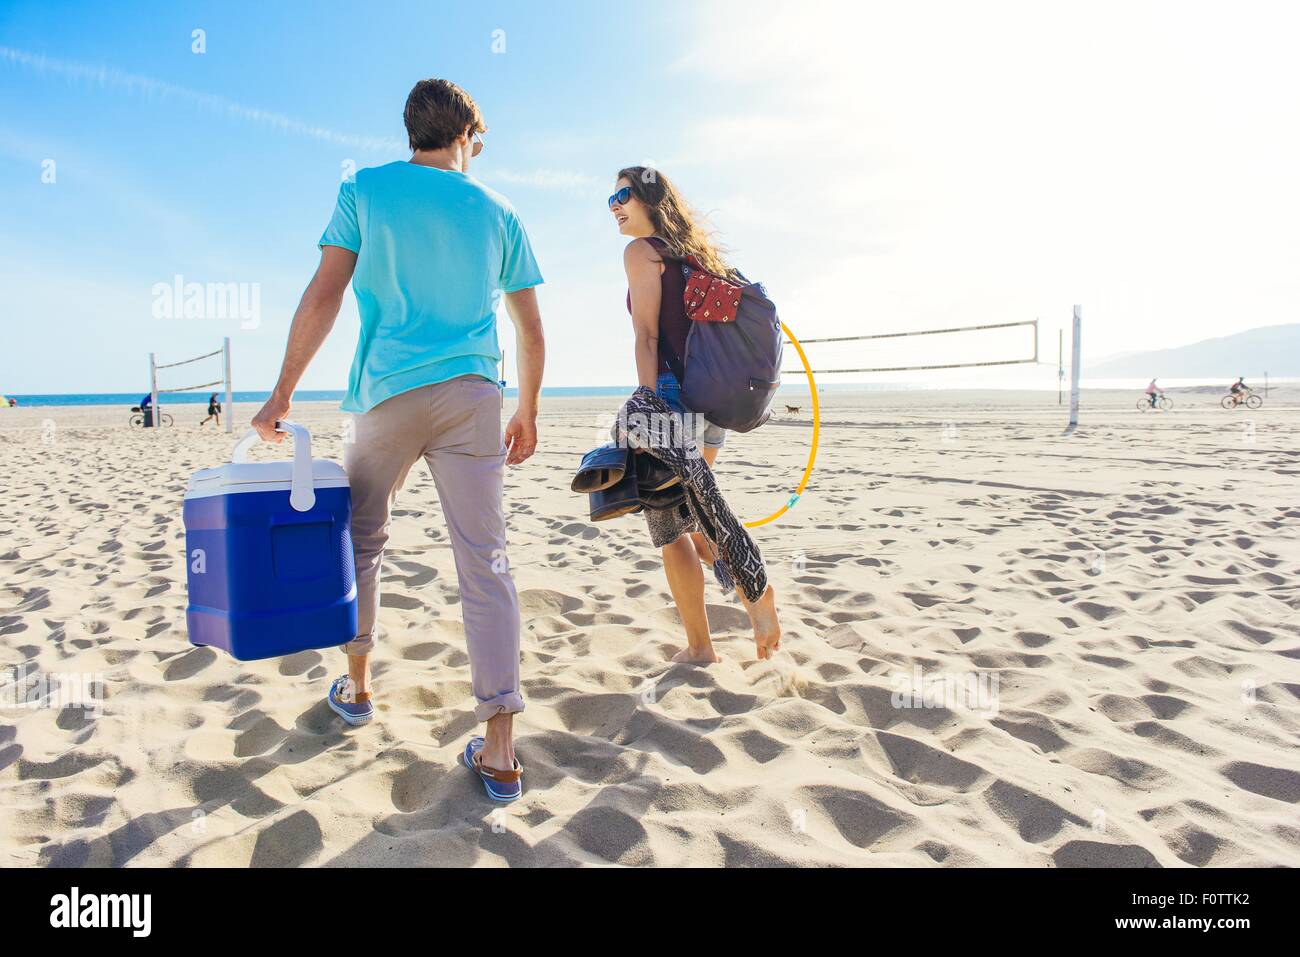 Young couple walking on beach, holding cool box, rear view Stock Photo